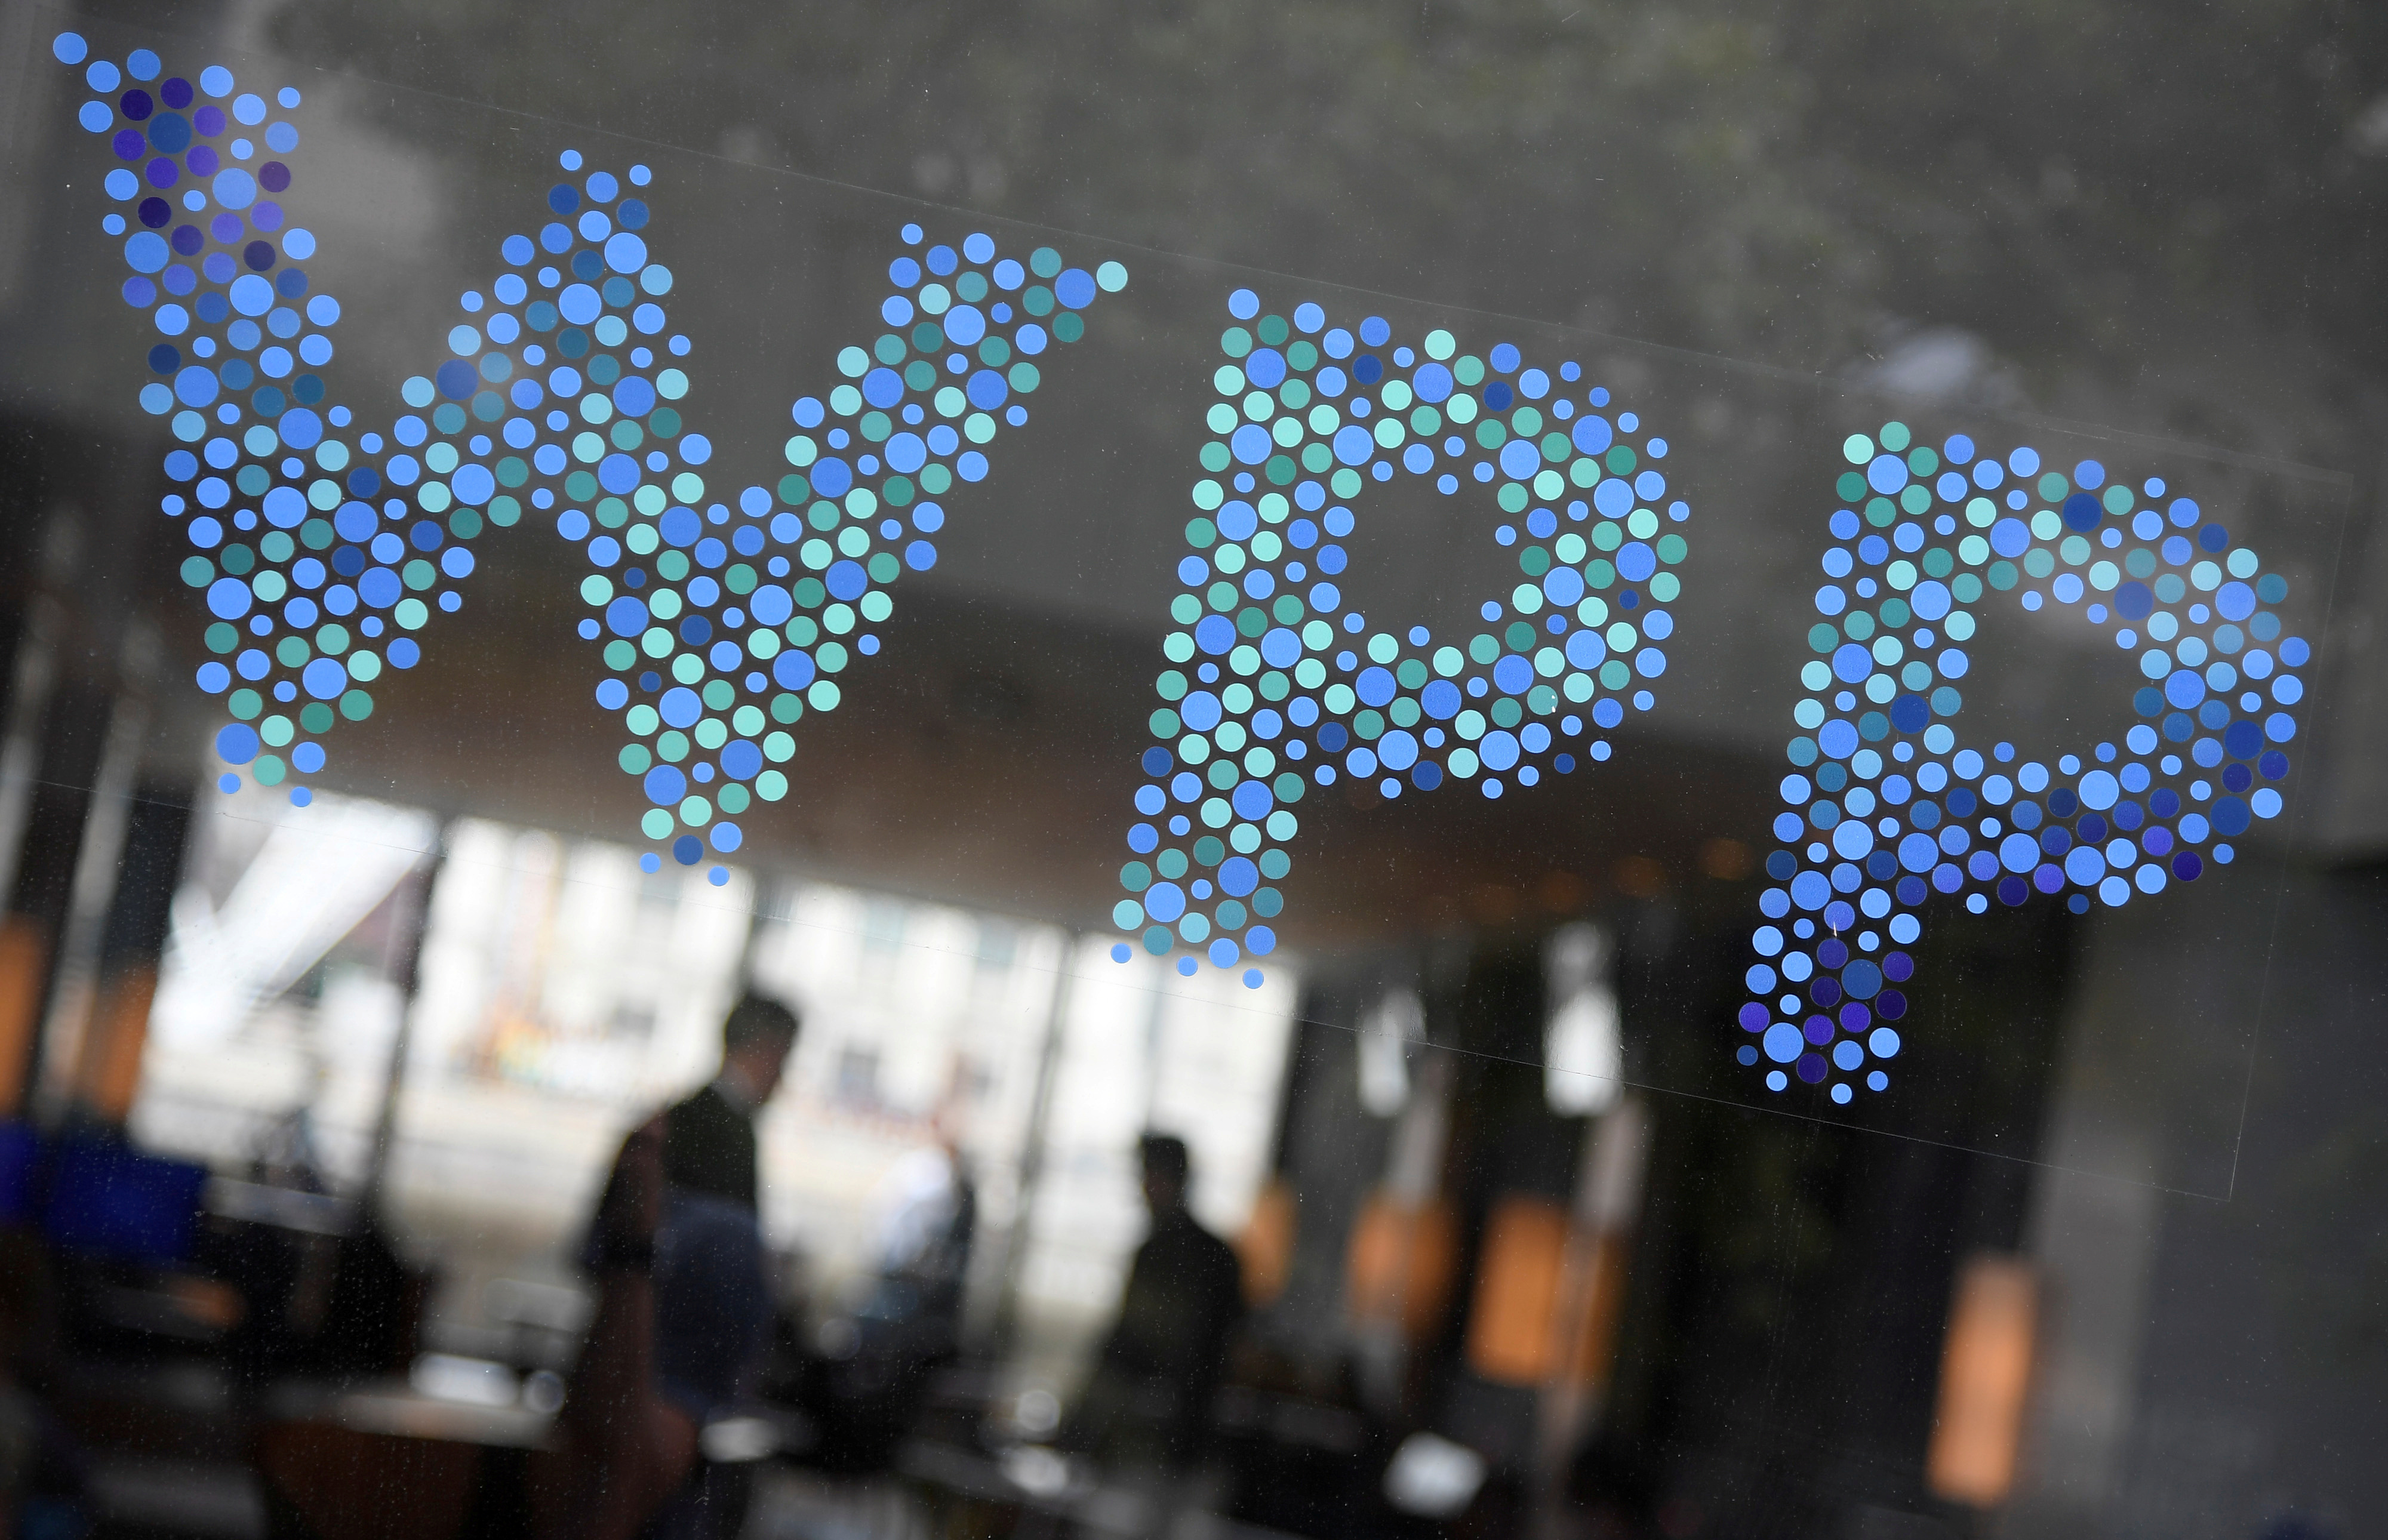 Branding signage is seen for WPP, the world's biggest advertising and marketing company, at their offices in London